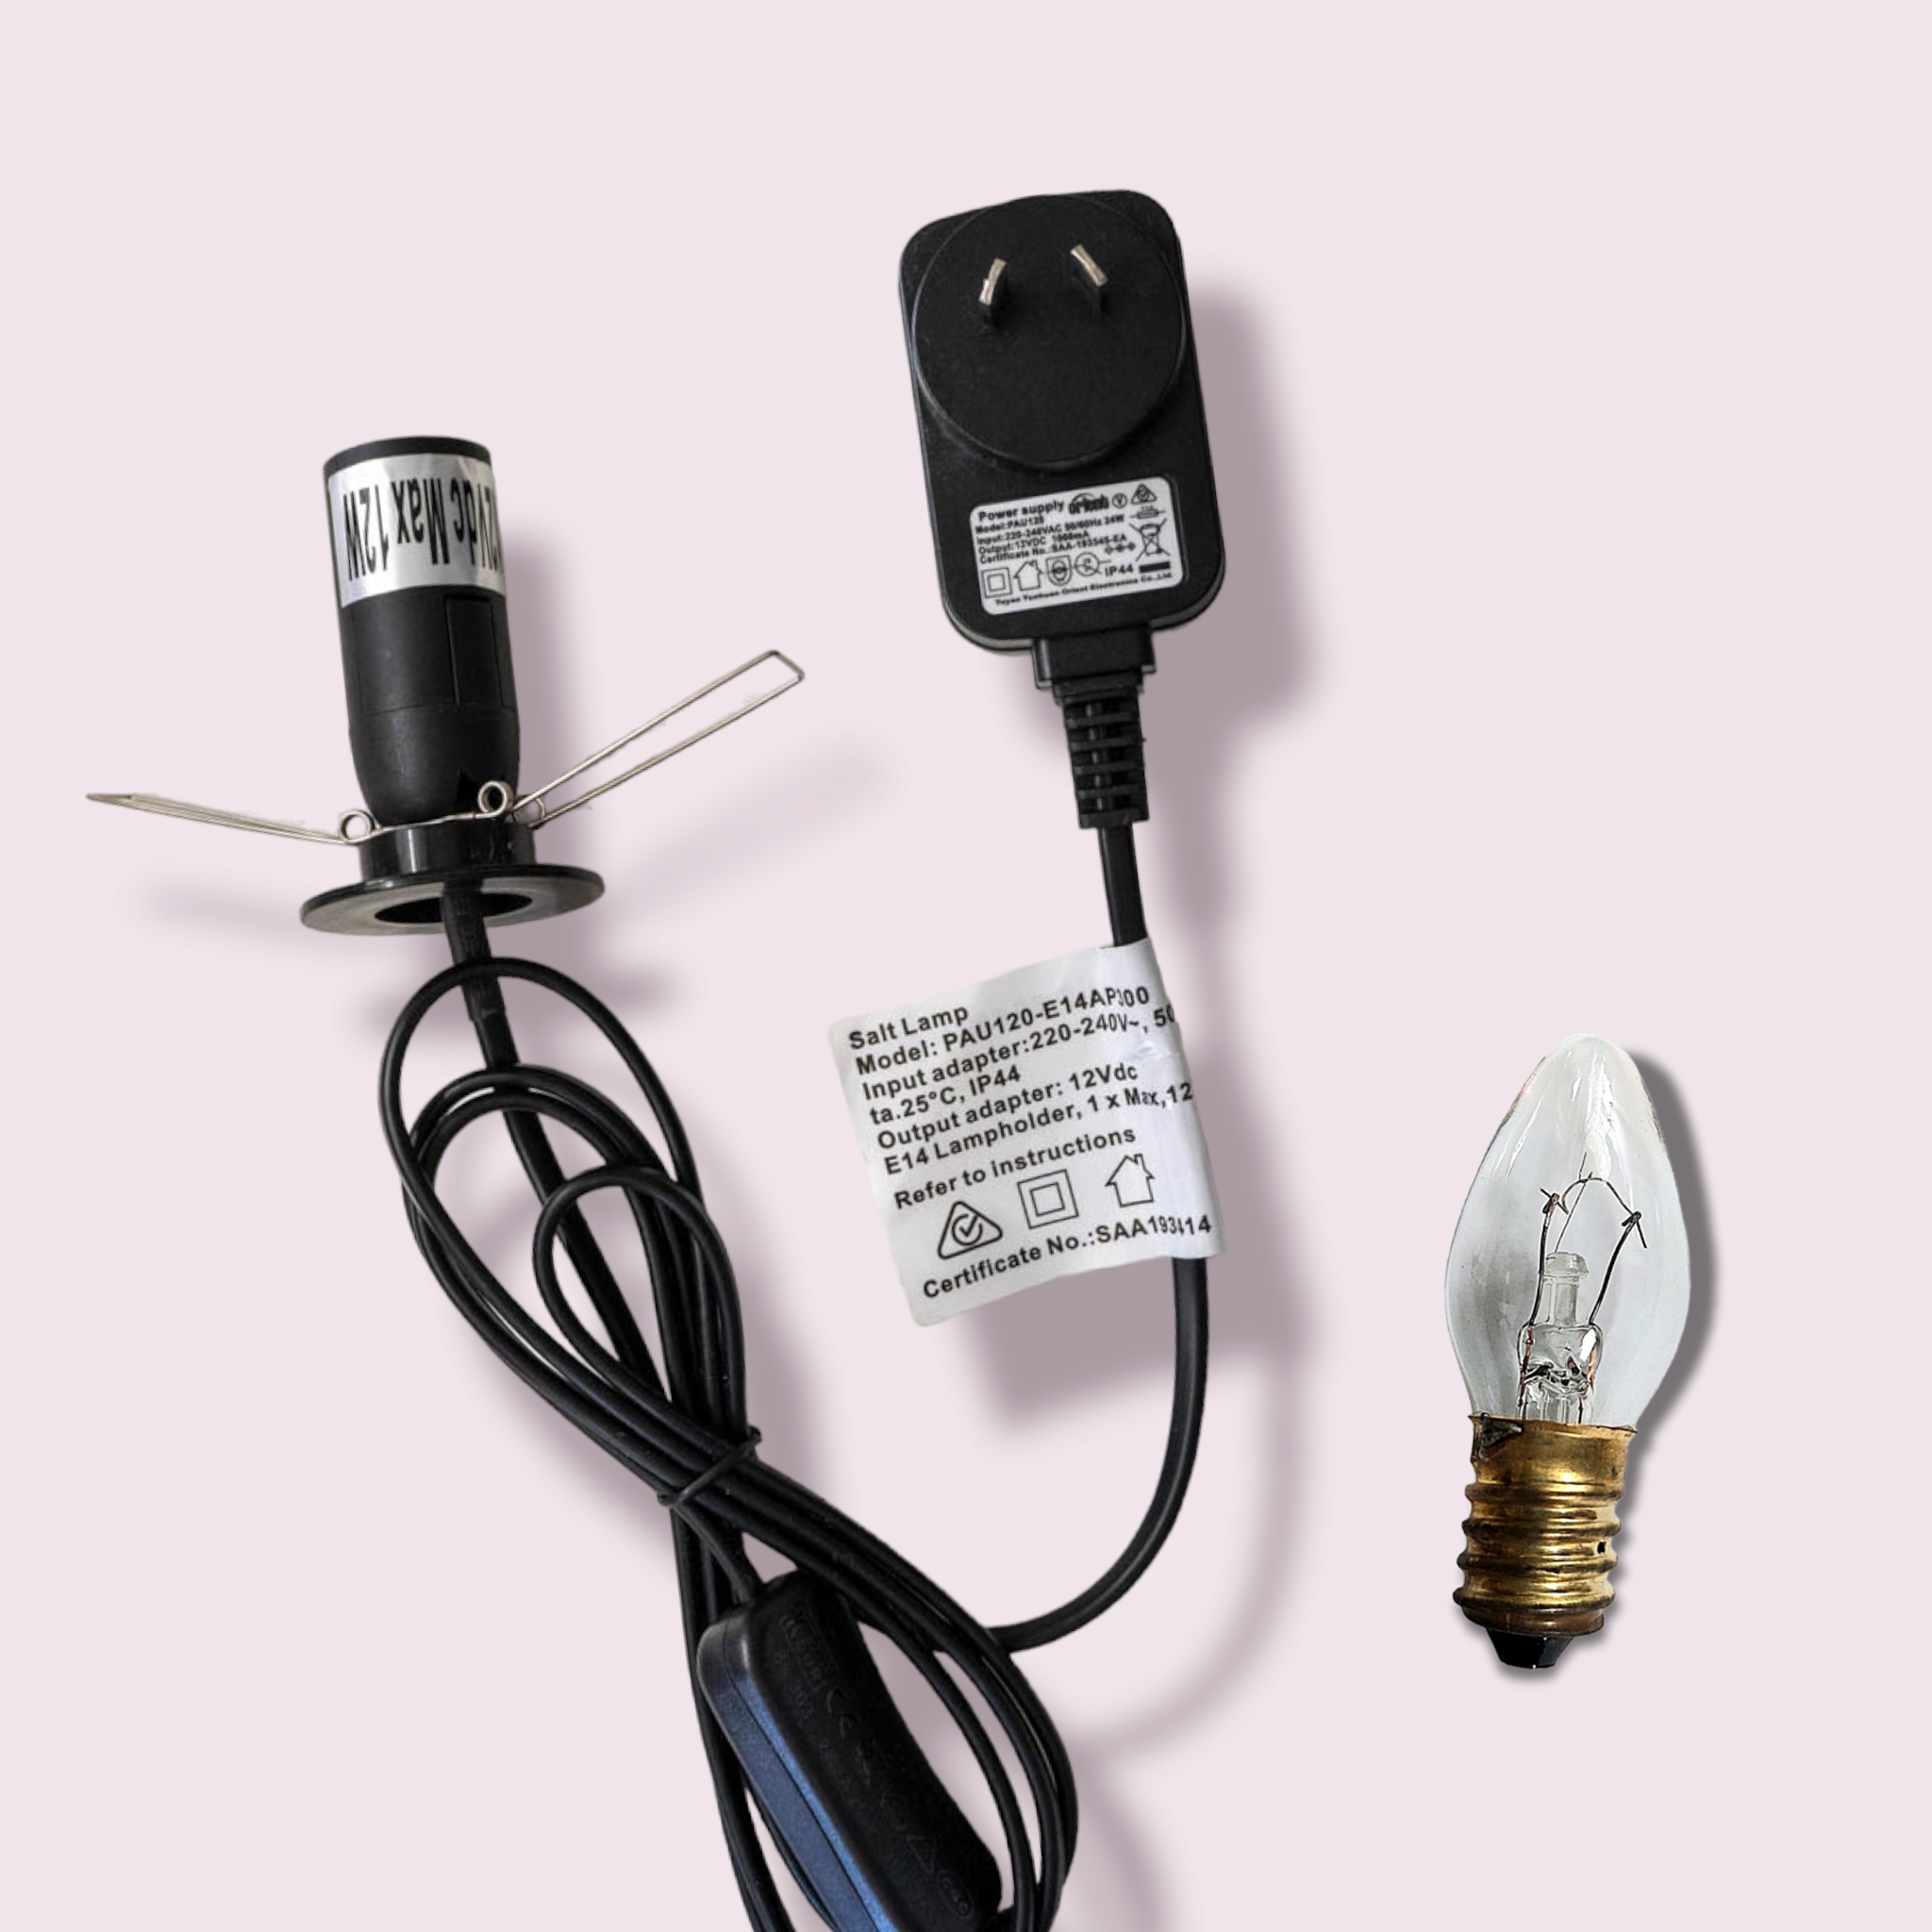 12V DC Lamp Power Cord with 12W light globe